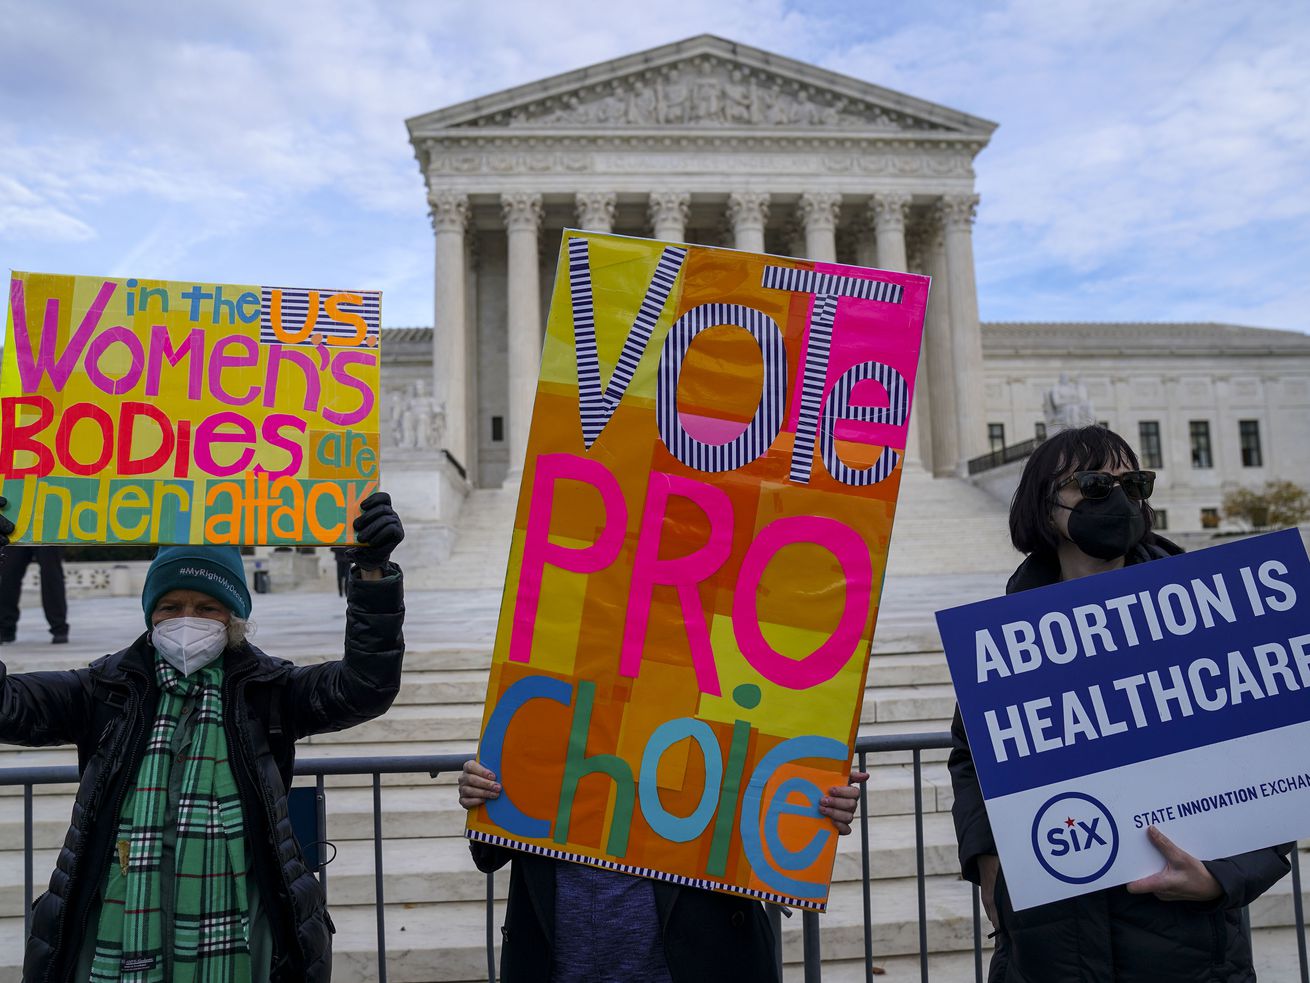 The Supreme Court could hand down another major attack on Roe v. Wade any day now